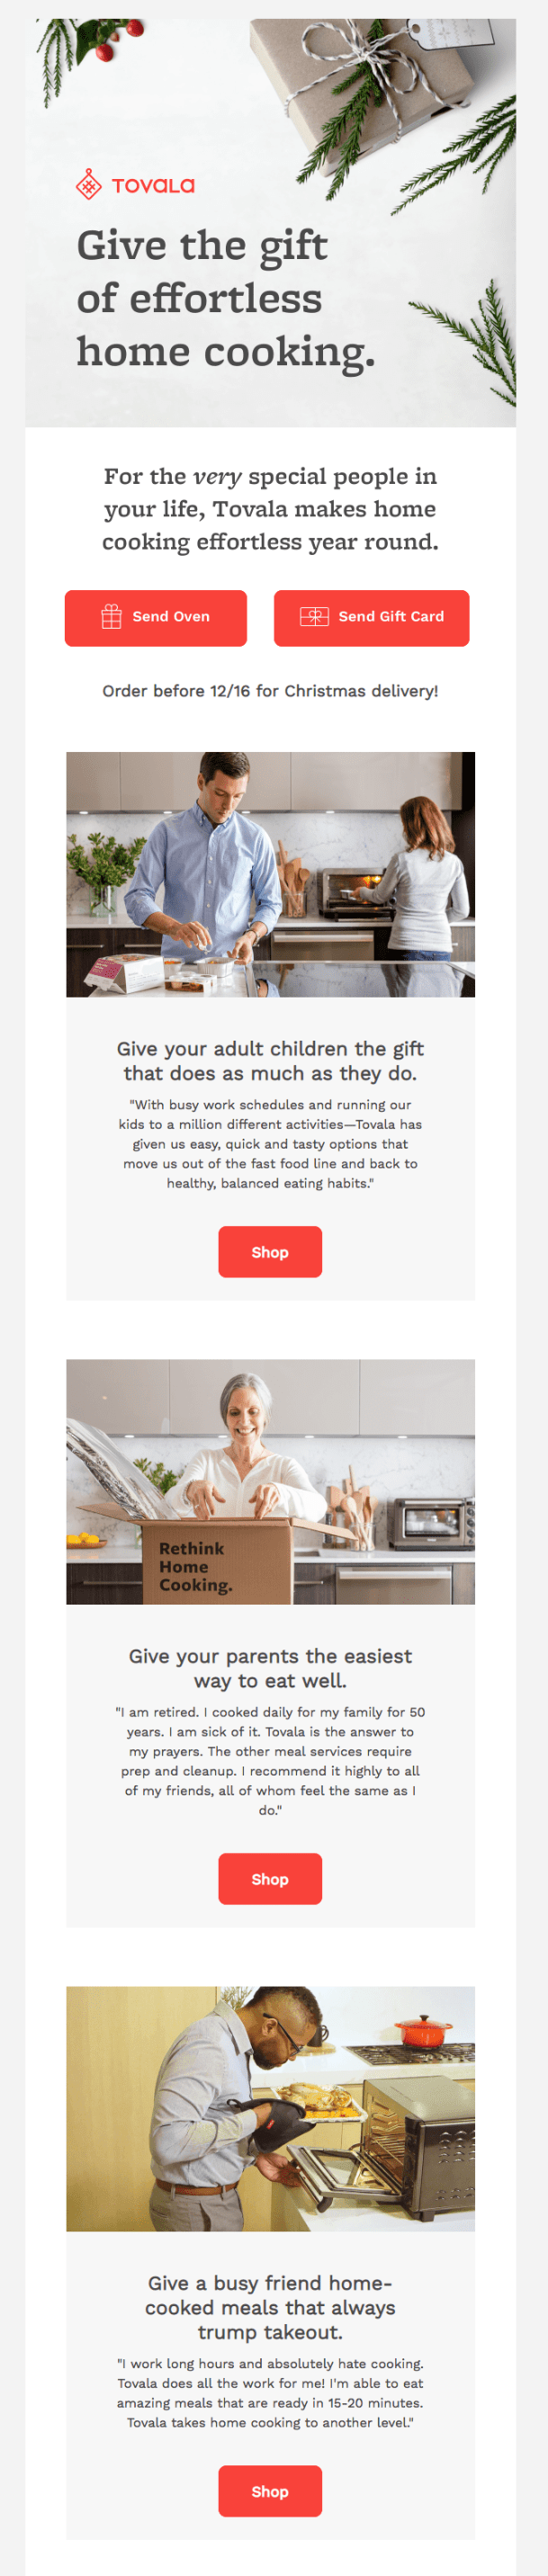 Christmas newsletter example by Tovala with gift advice